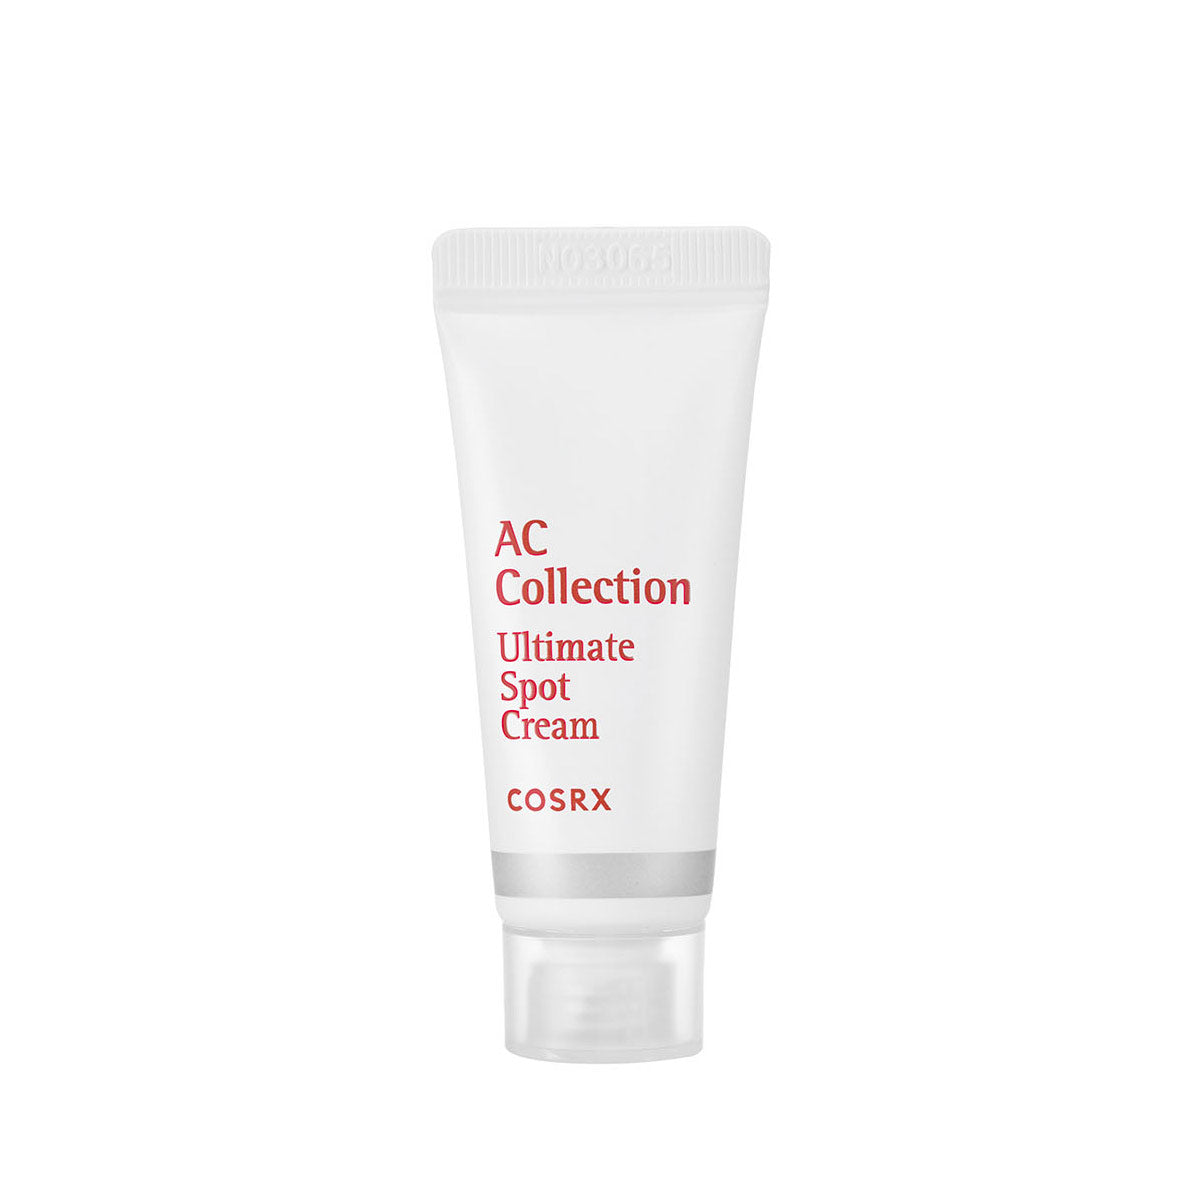 Cosrx AC Collection Ultimate Spot Cream (Pack Size:30g)